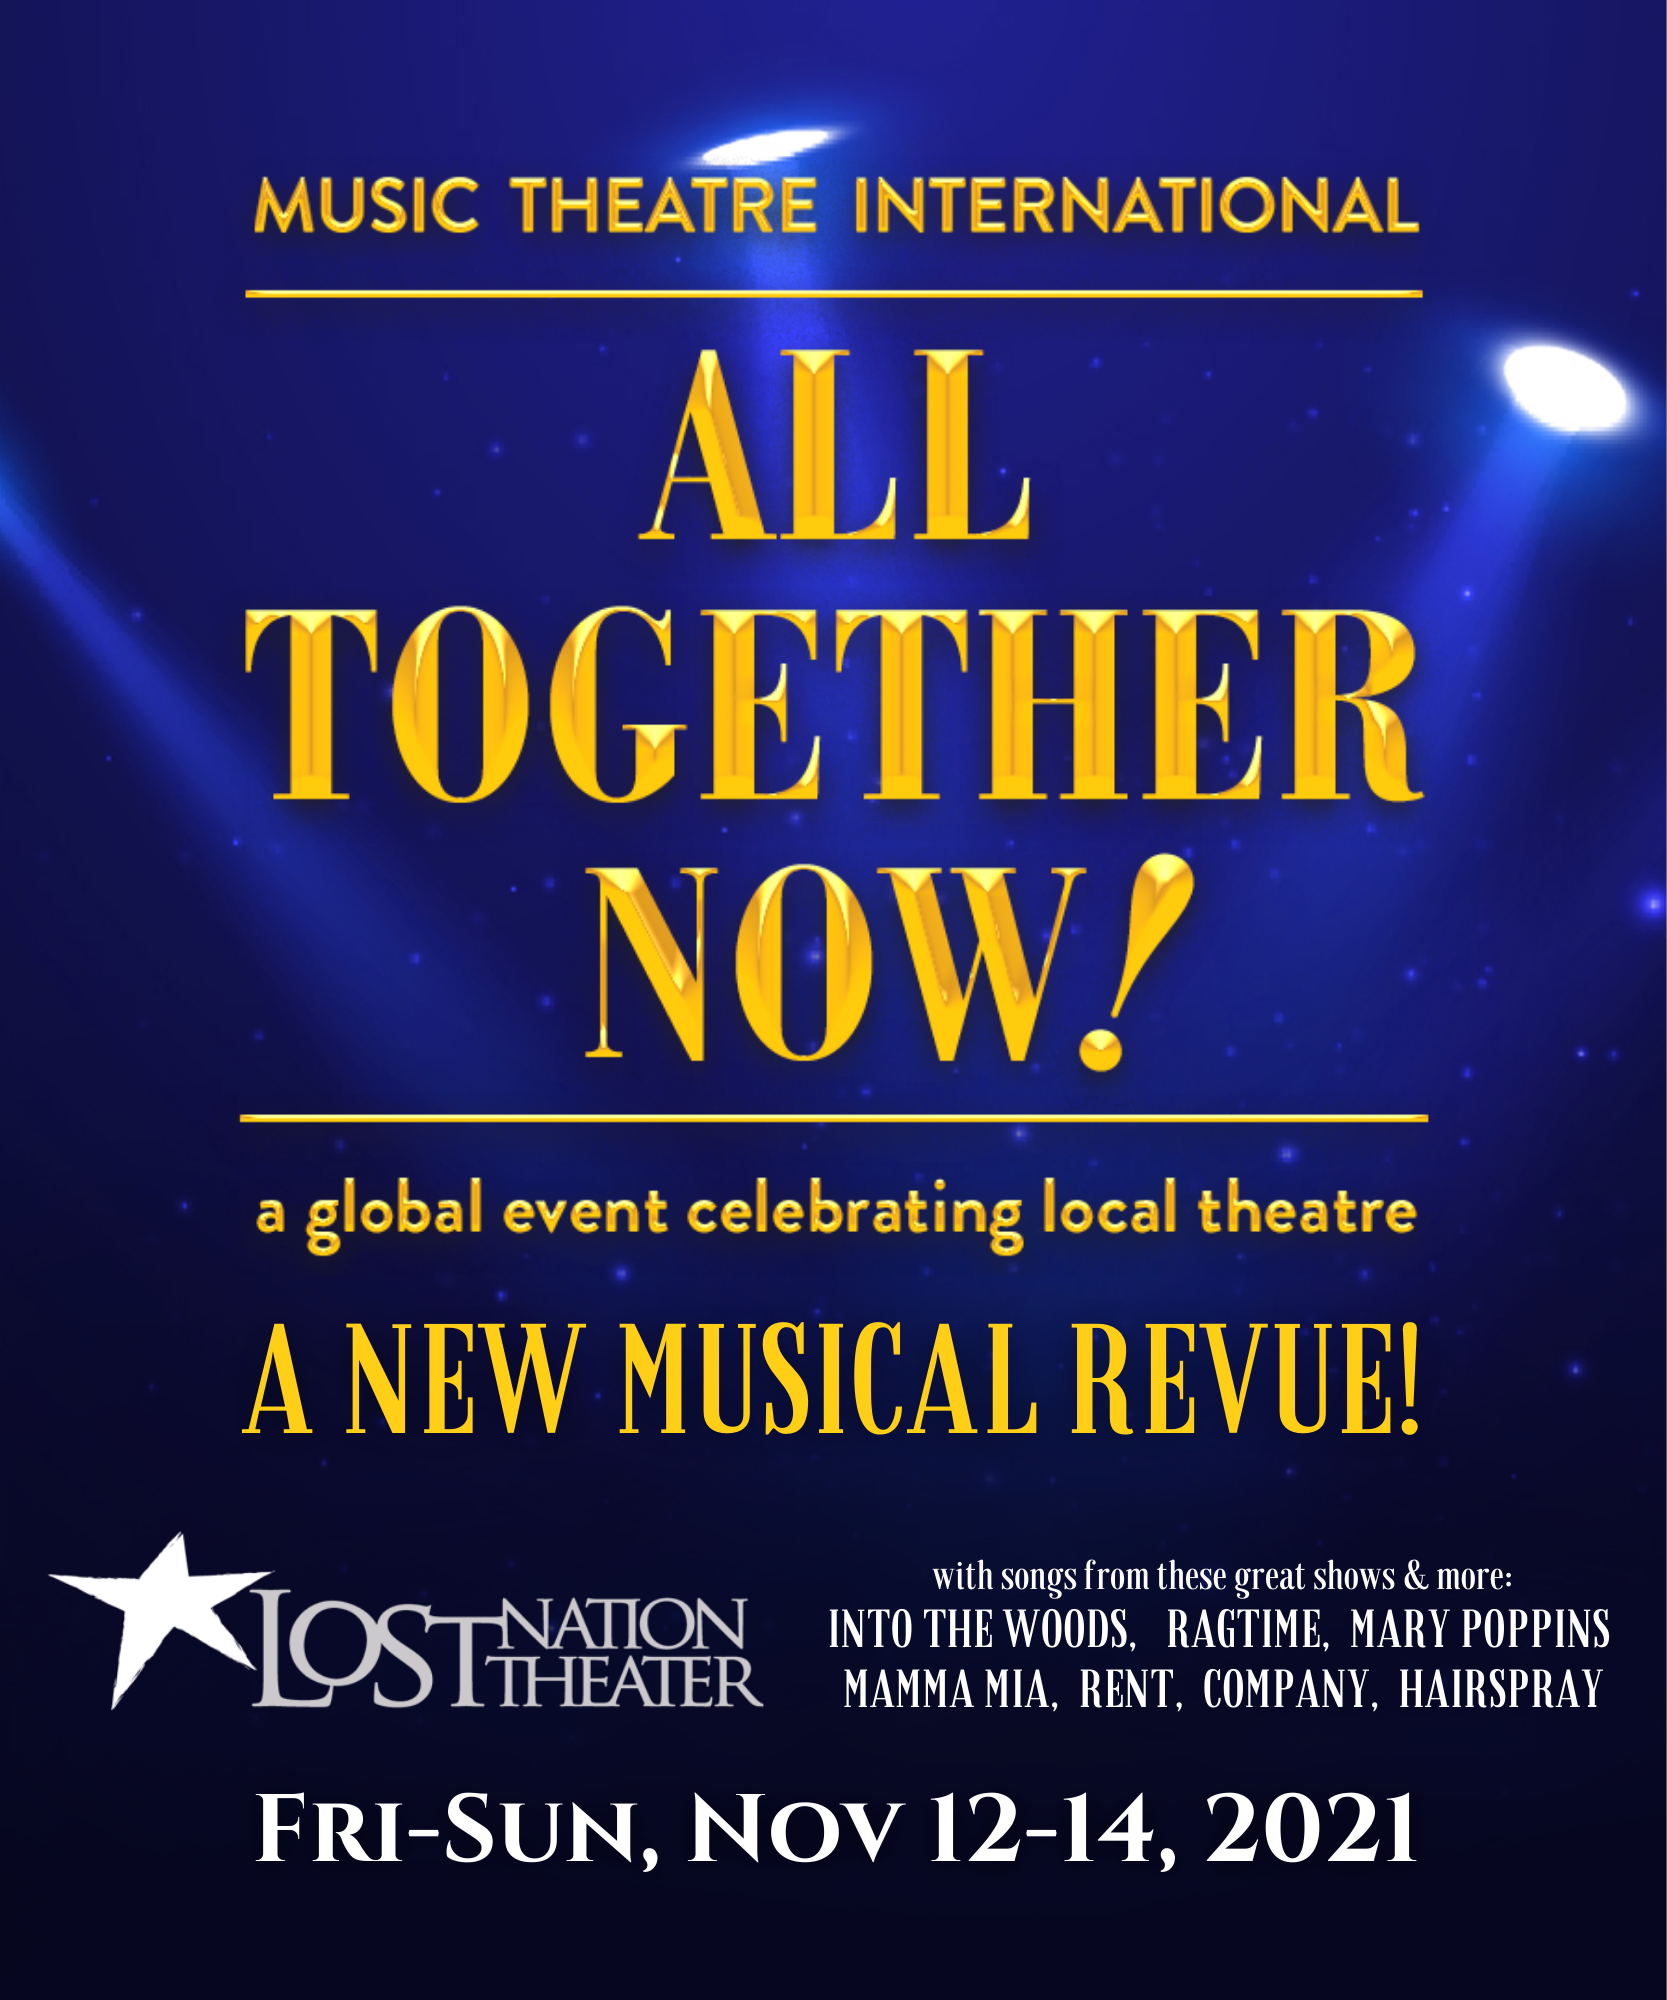 POSTER for musical reviue all together now